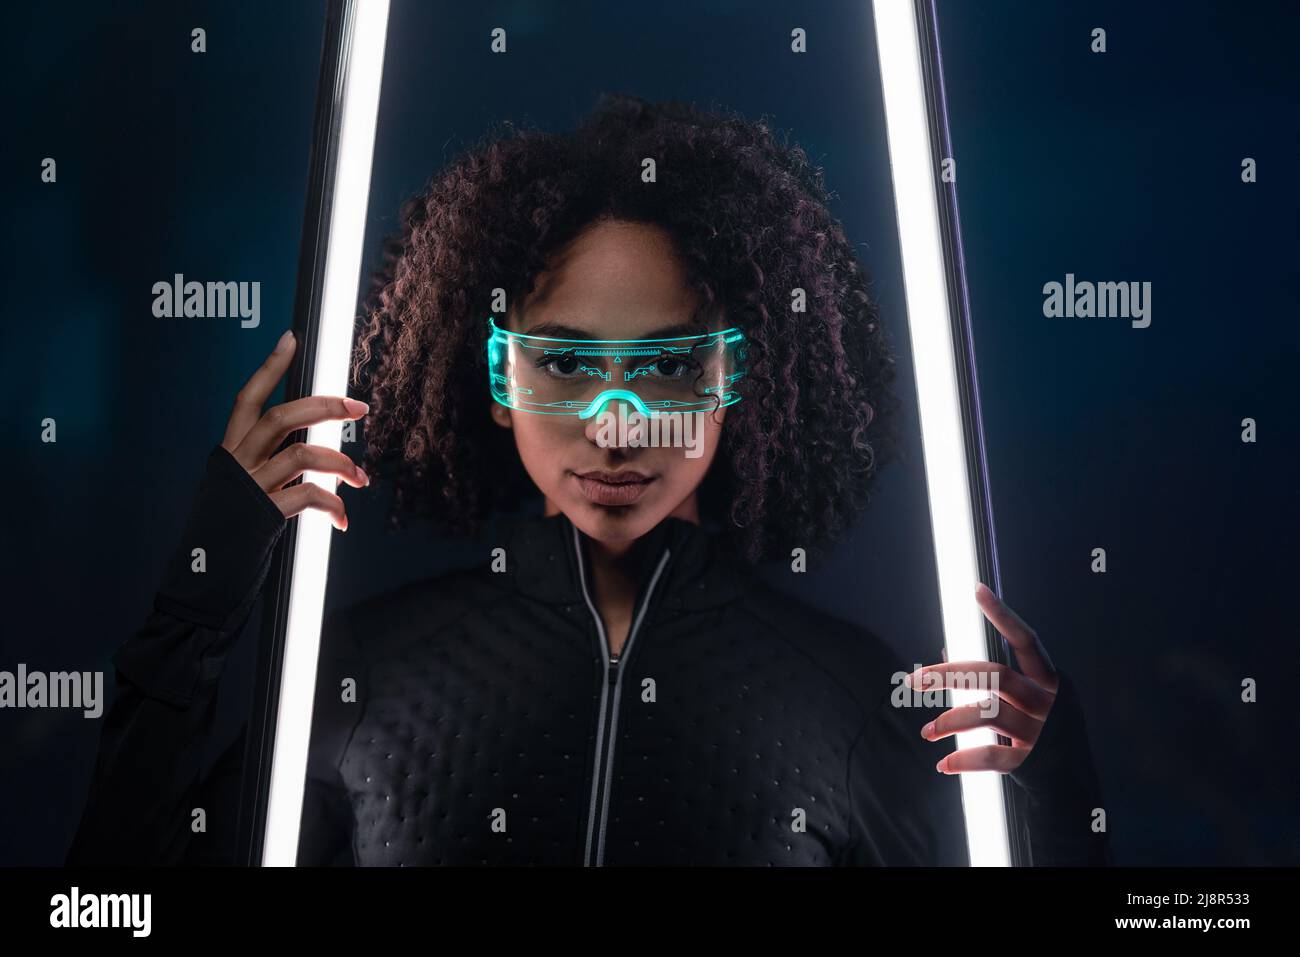 Metaverse digital cyber world technology, young woman with smart glasses, futuristic lifestyle Stock Photo